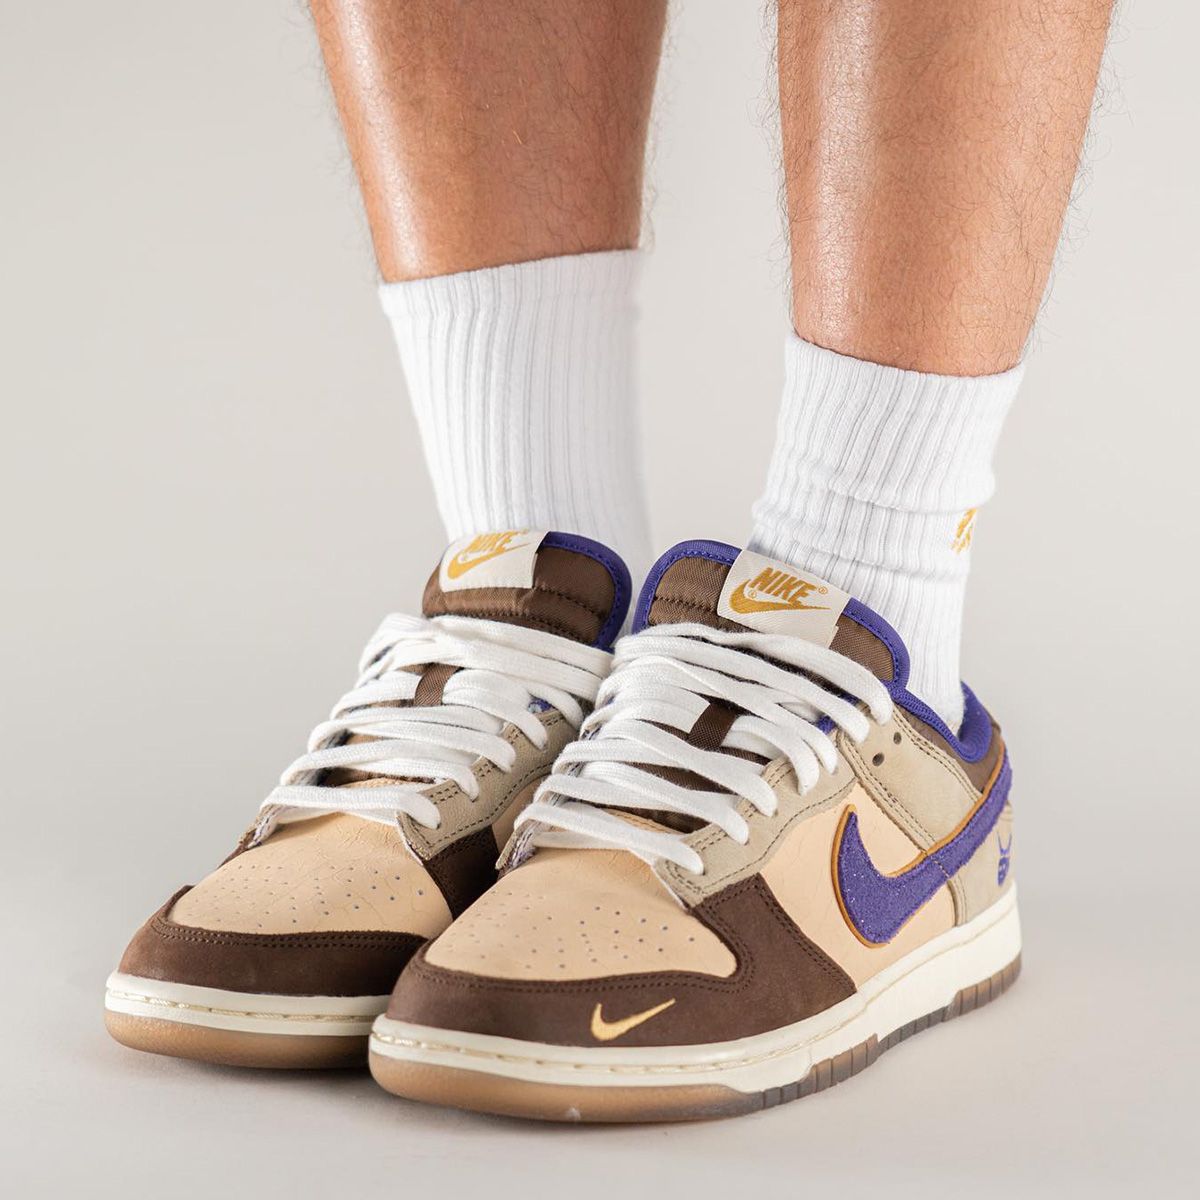 Where to Buy the Nike Dunk Low “Setsuban”